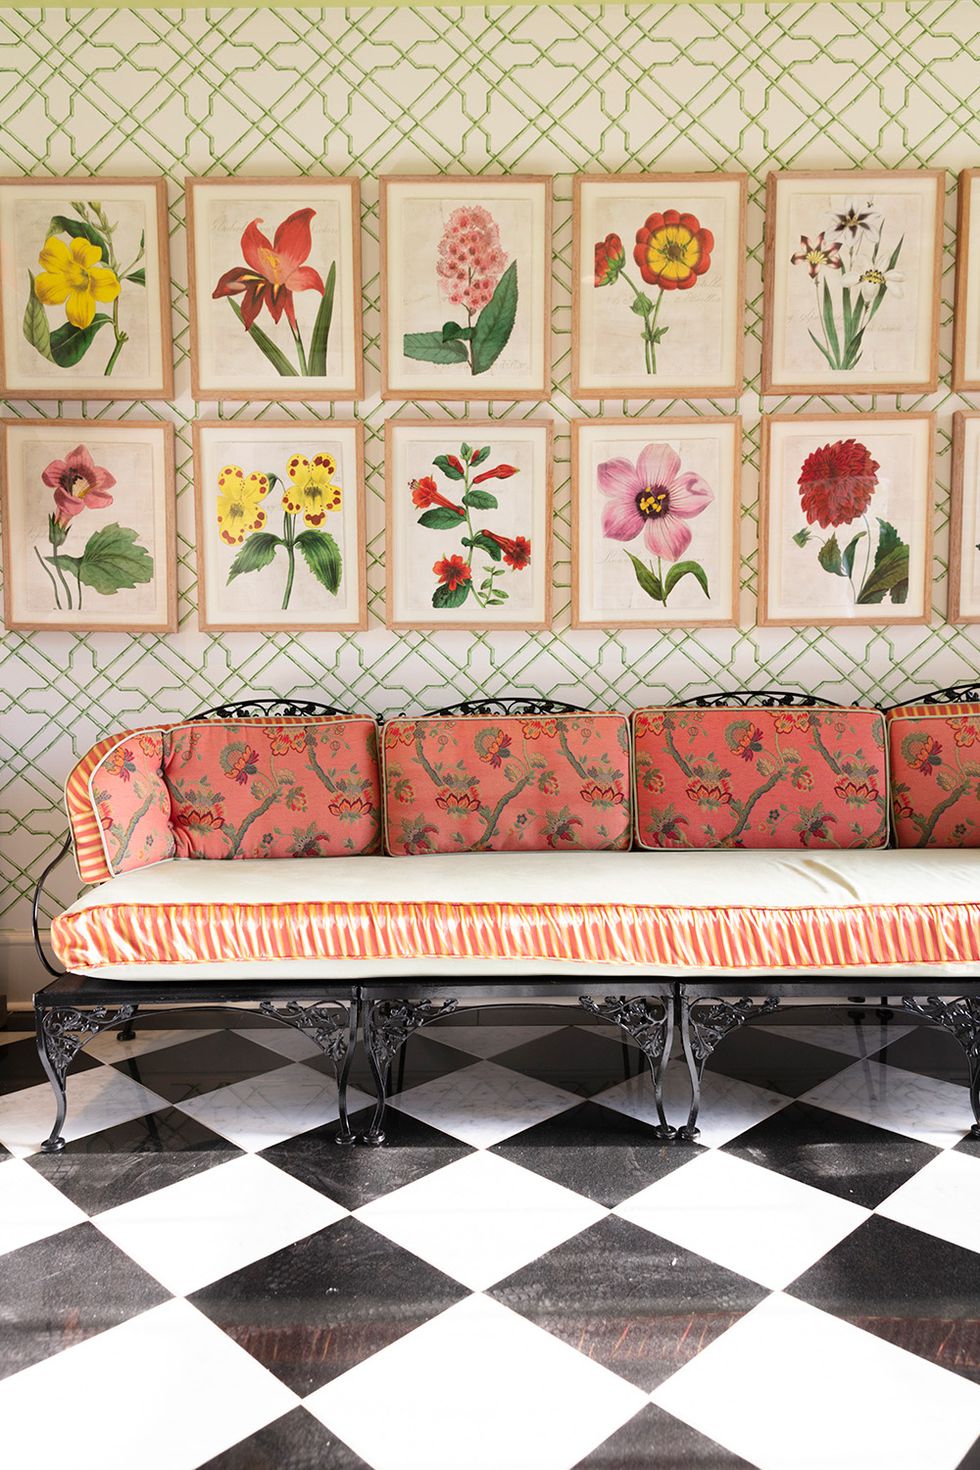 patterned couch in a sunroom at the southern hotel in covington louisiana